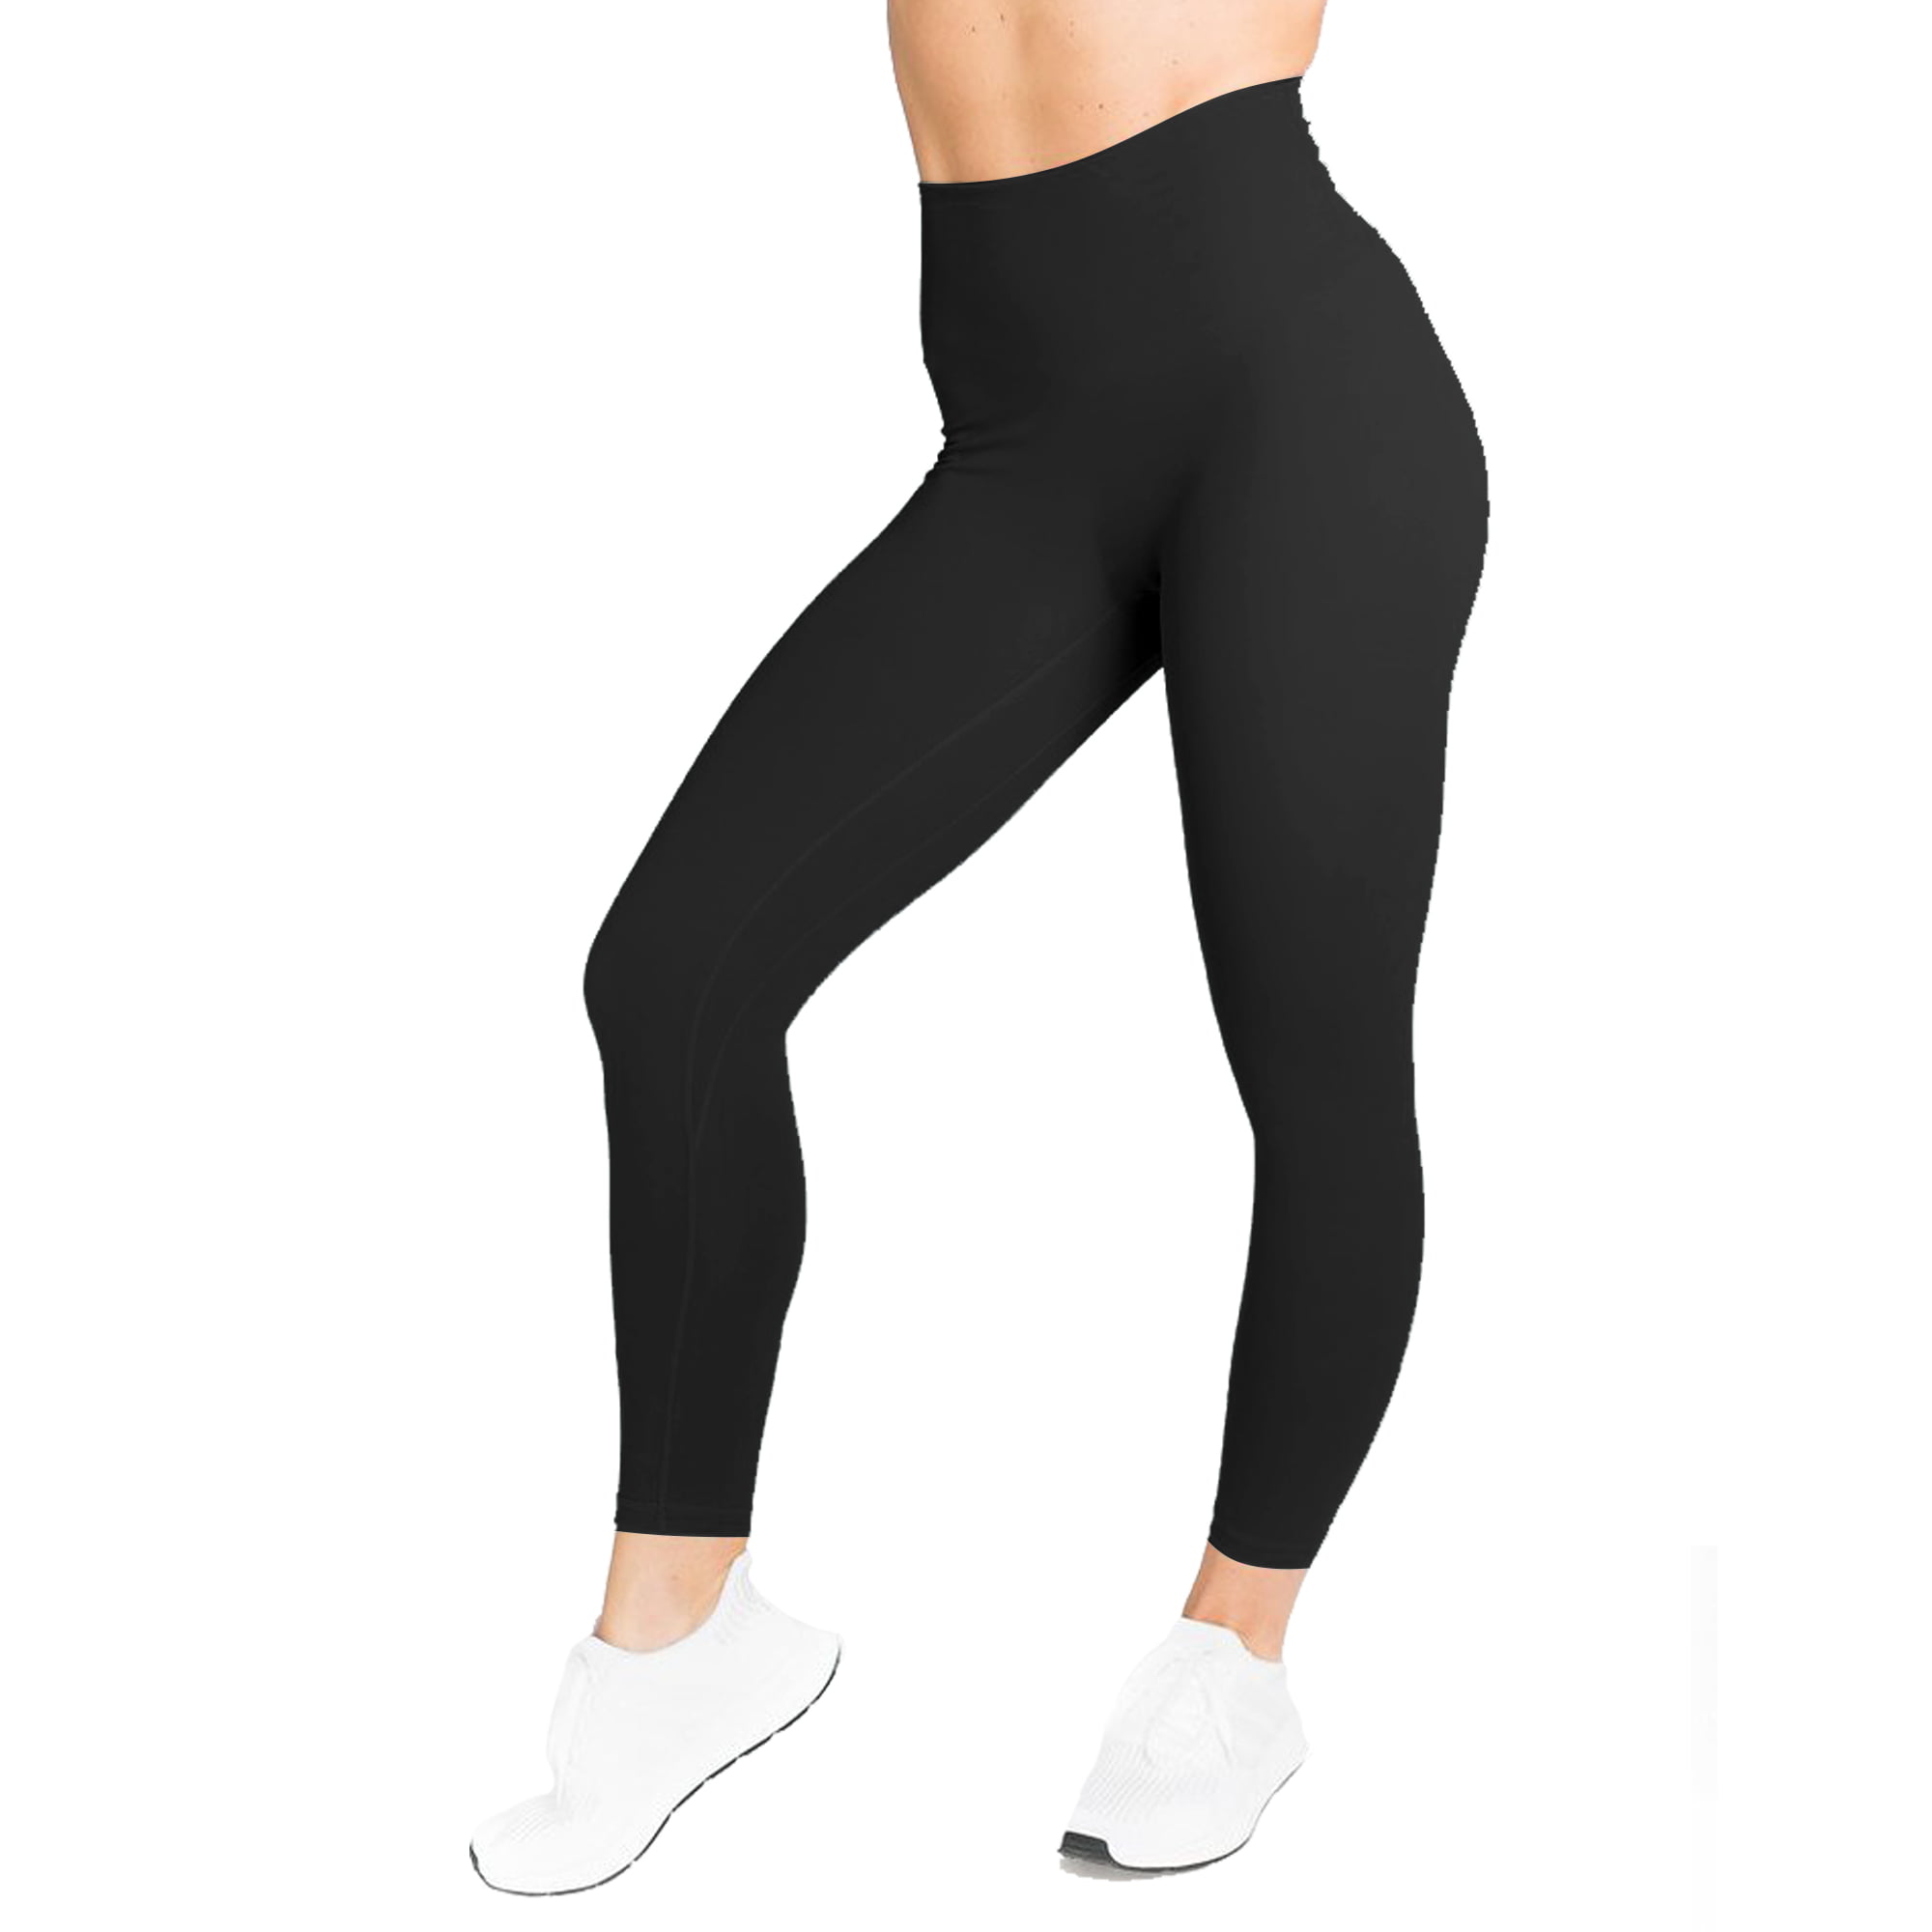 Yoga Pants Women Workout Sport High Waisted Legging Fitness Seamless Tights  Workout Activewear For Running, Gym and Kicking, Black-M 